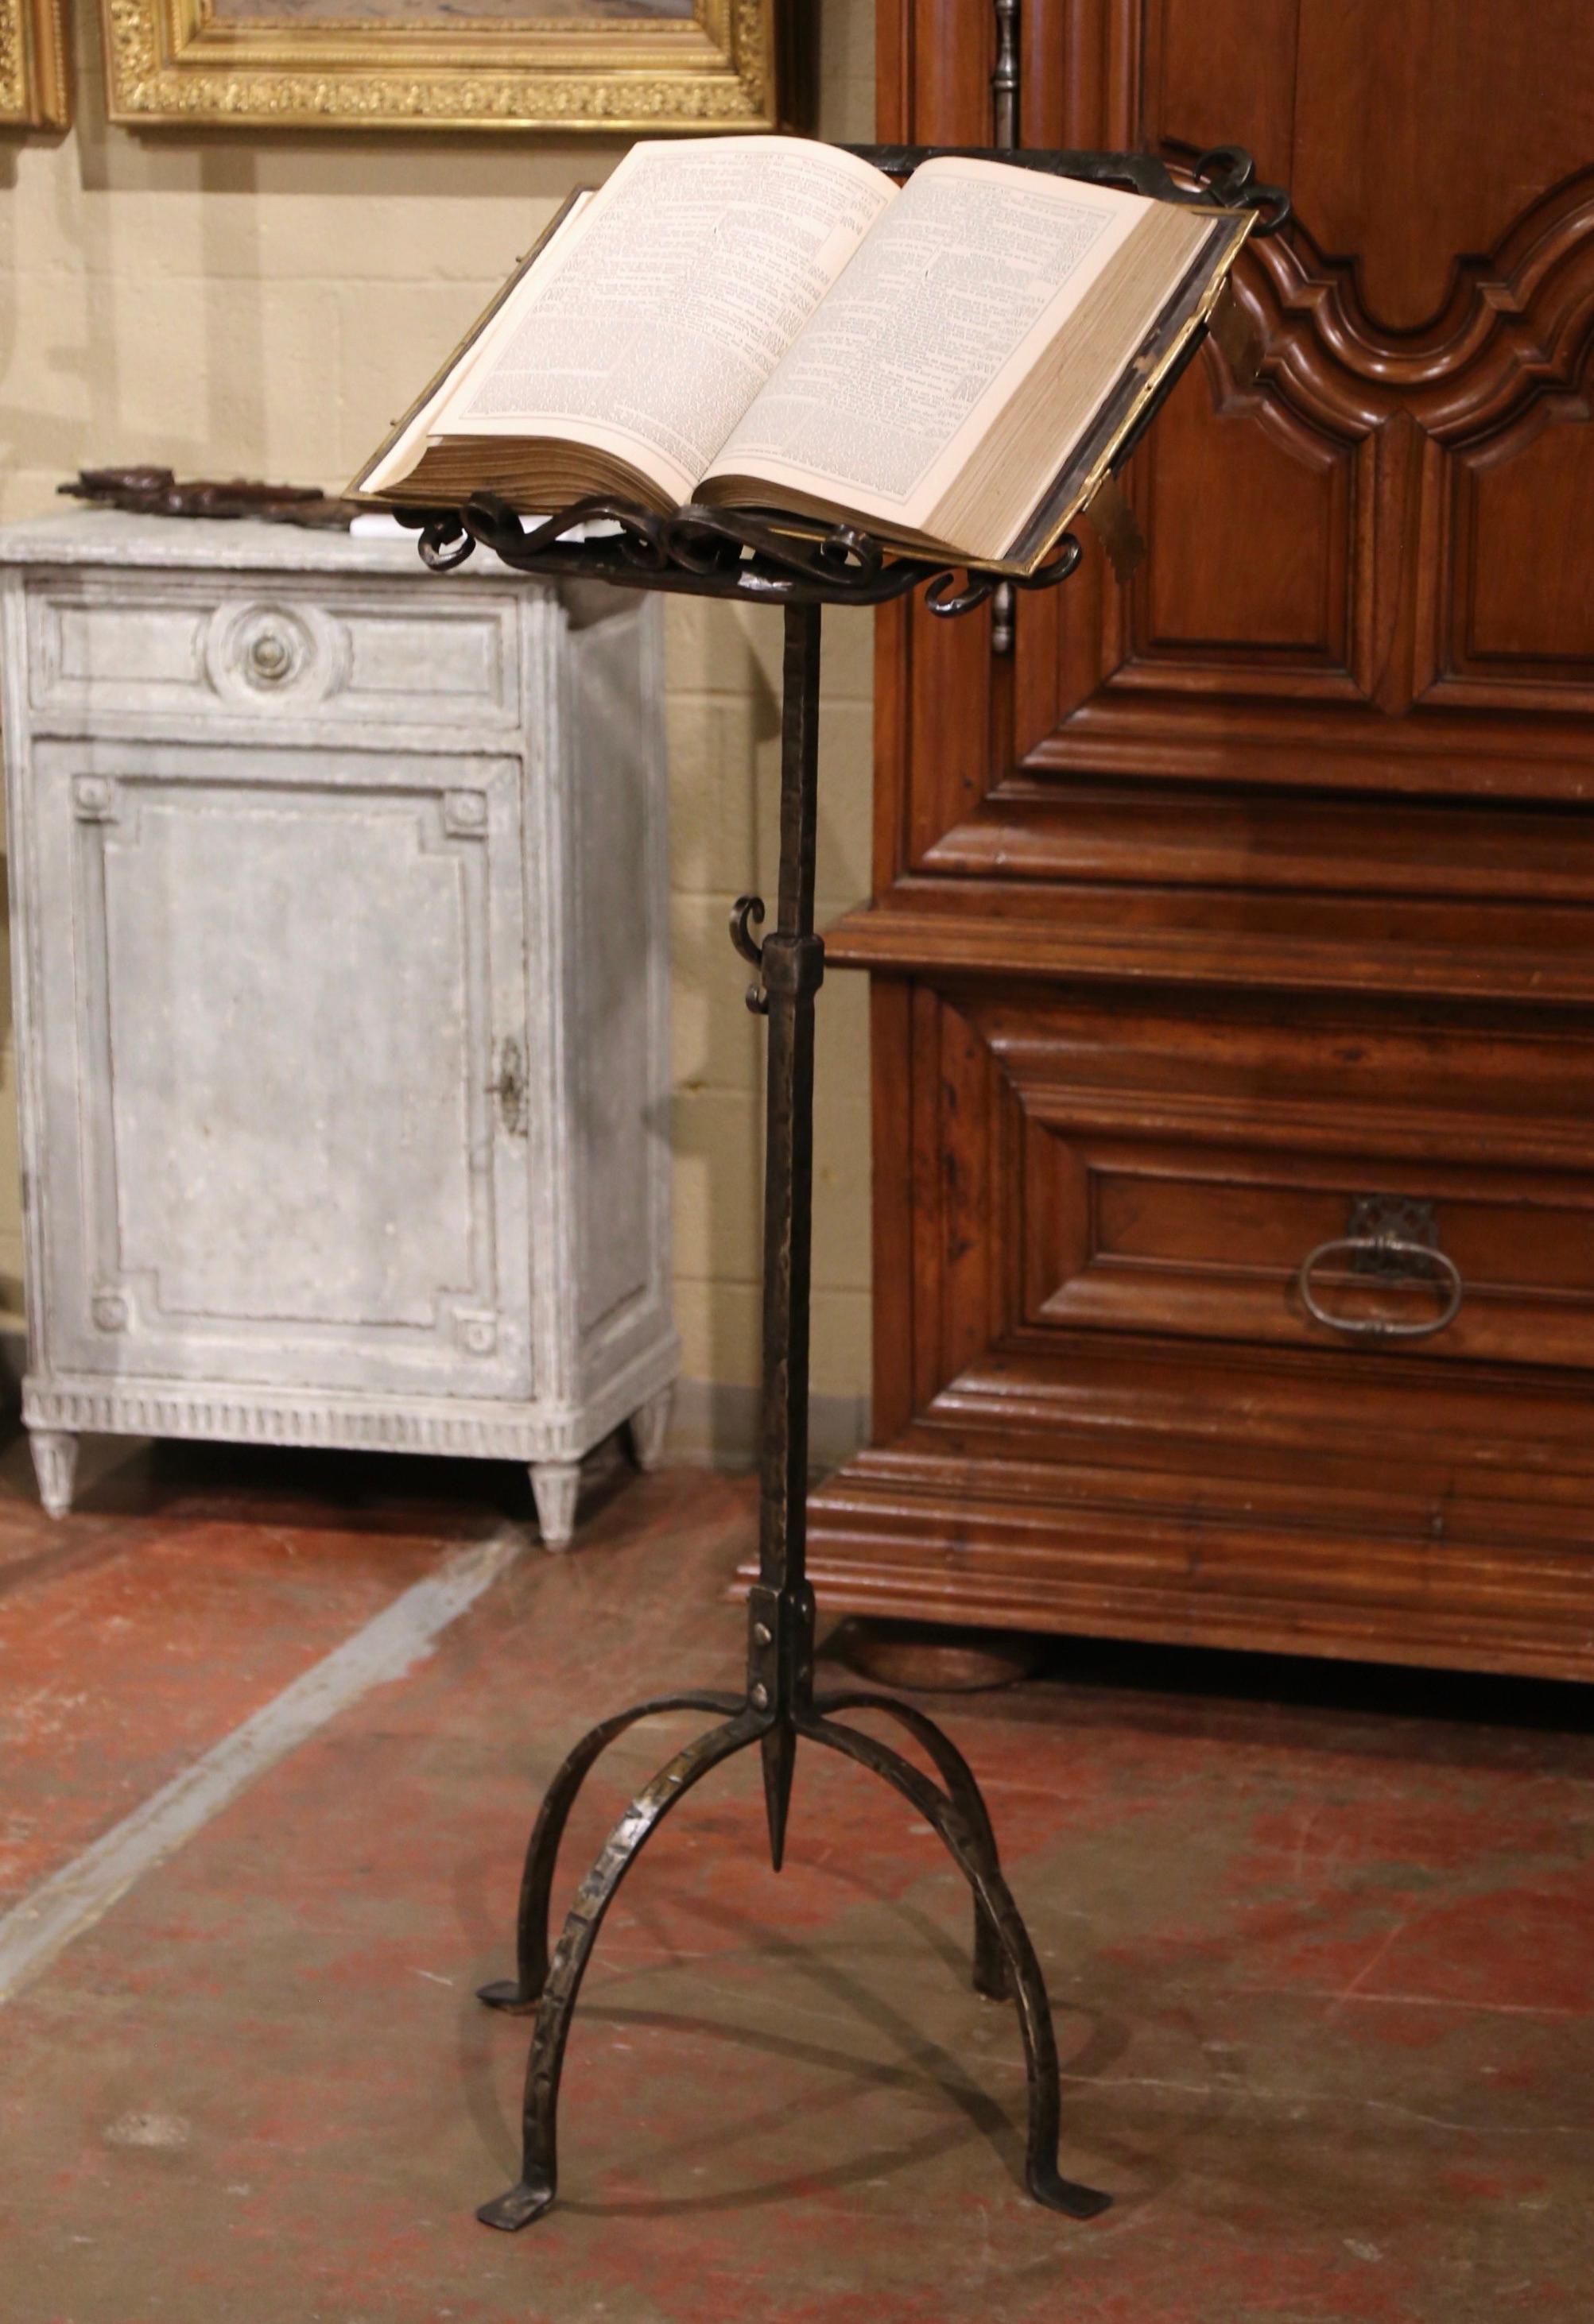  19th Century French Forged Iron Music Stand Lectern with Fleur-de-Lys Decor 1